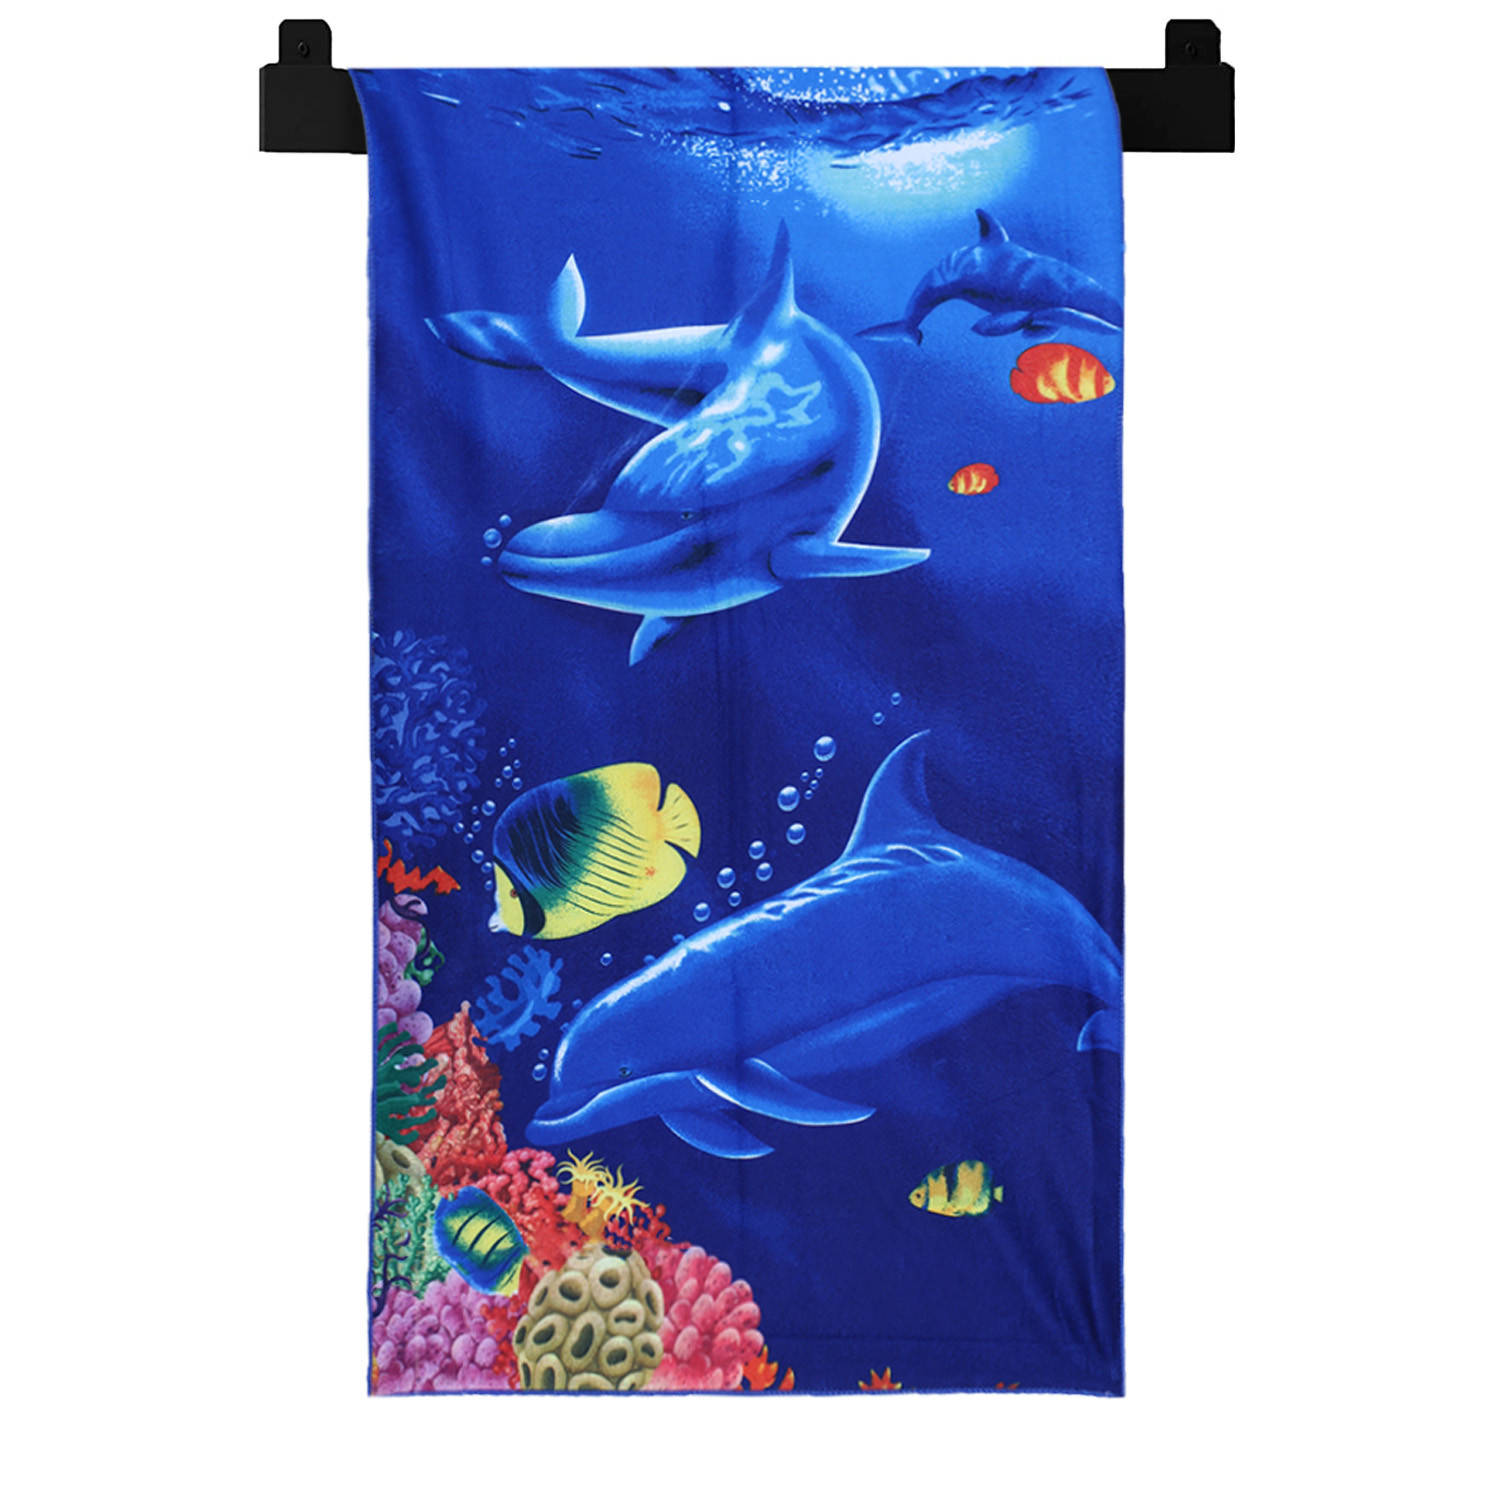 Kuber Industries Kids Bath Towel|Soft Cotton & Sides Stitched Baby Towel|Microfibered Super Absorbent Aquarium Pattern Towel for Infants,Toddler,55x26 Inch (Navy Blue)